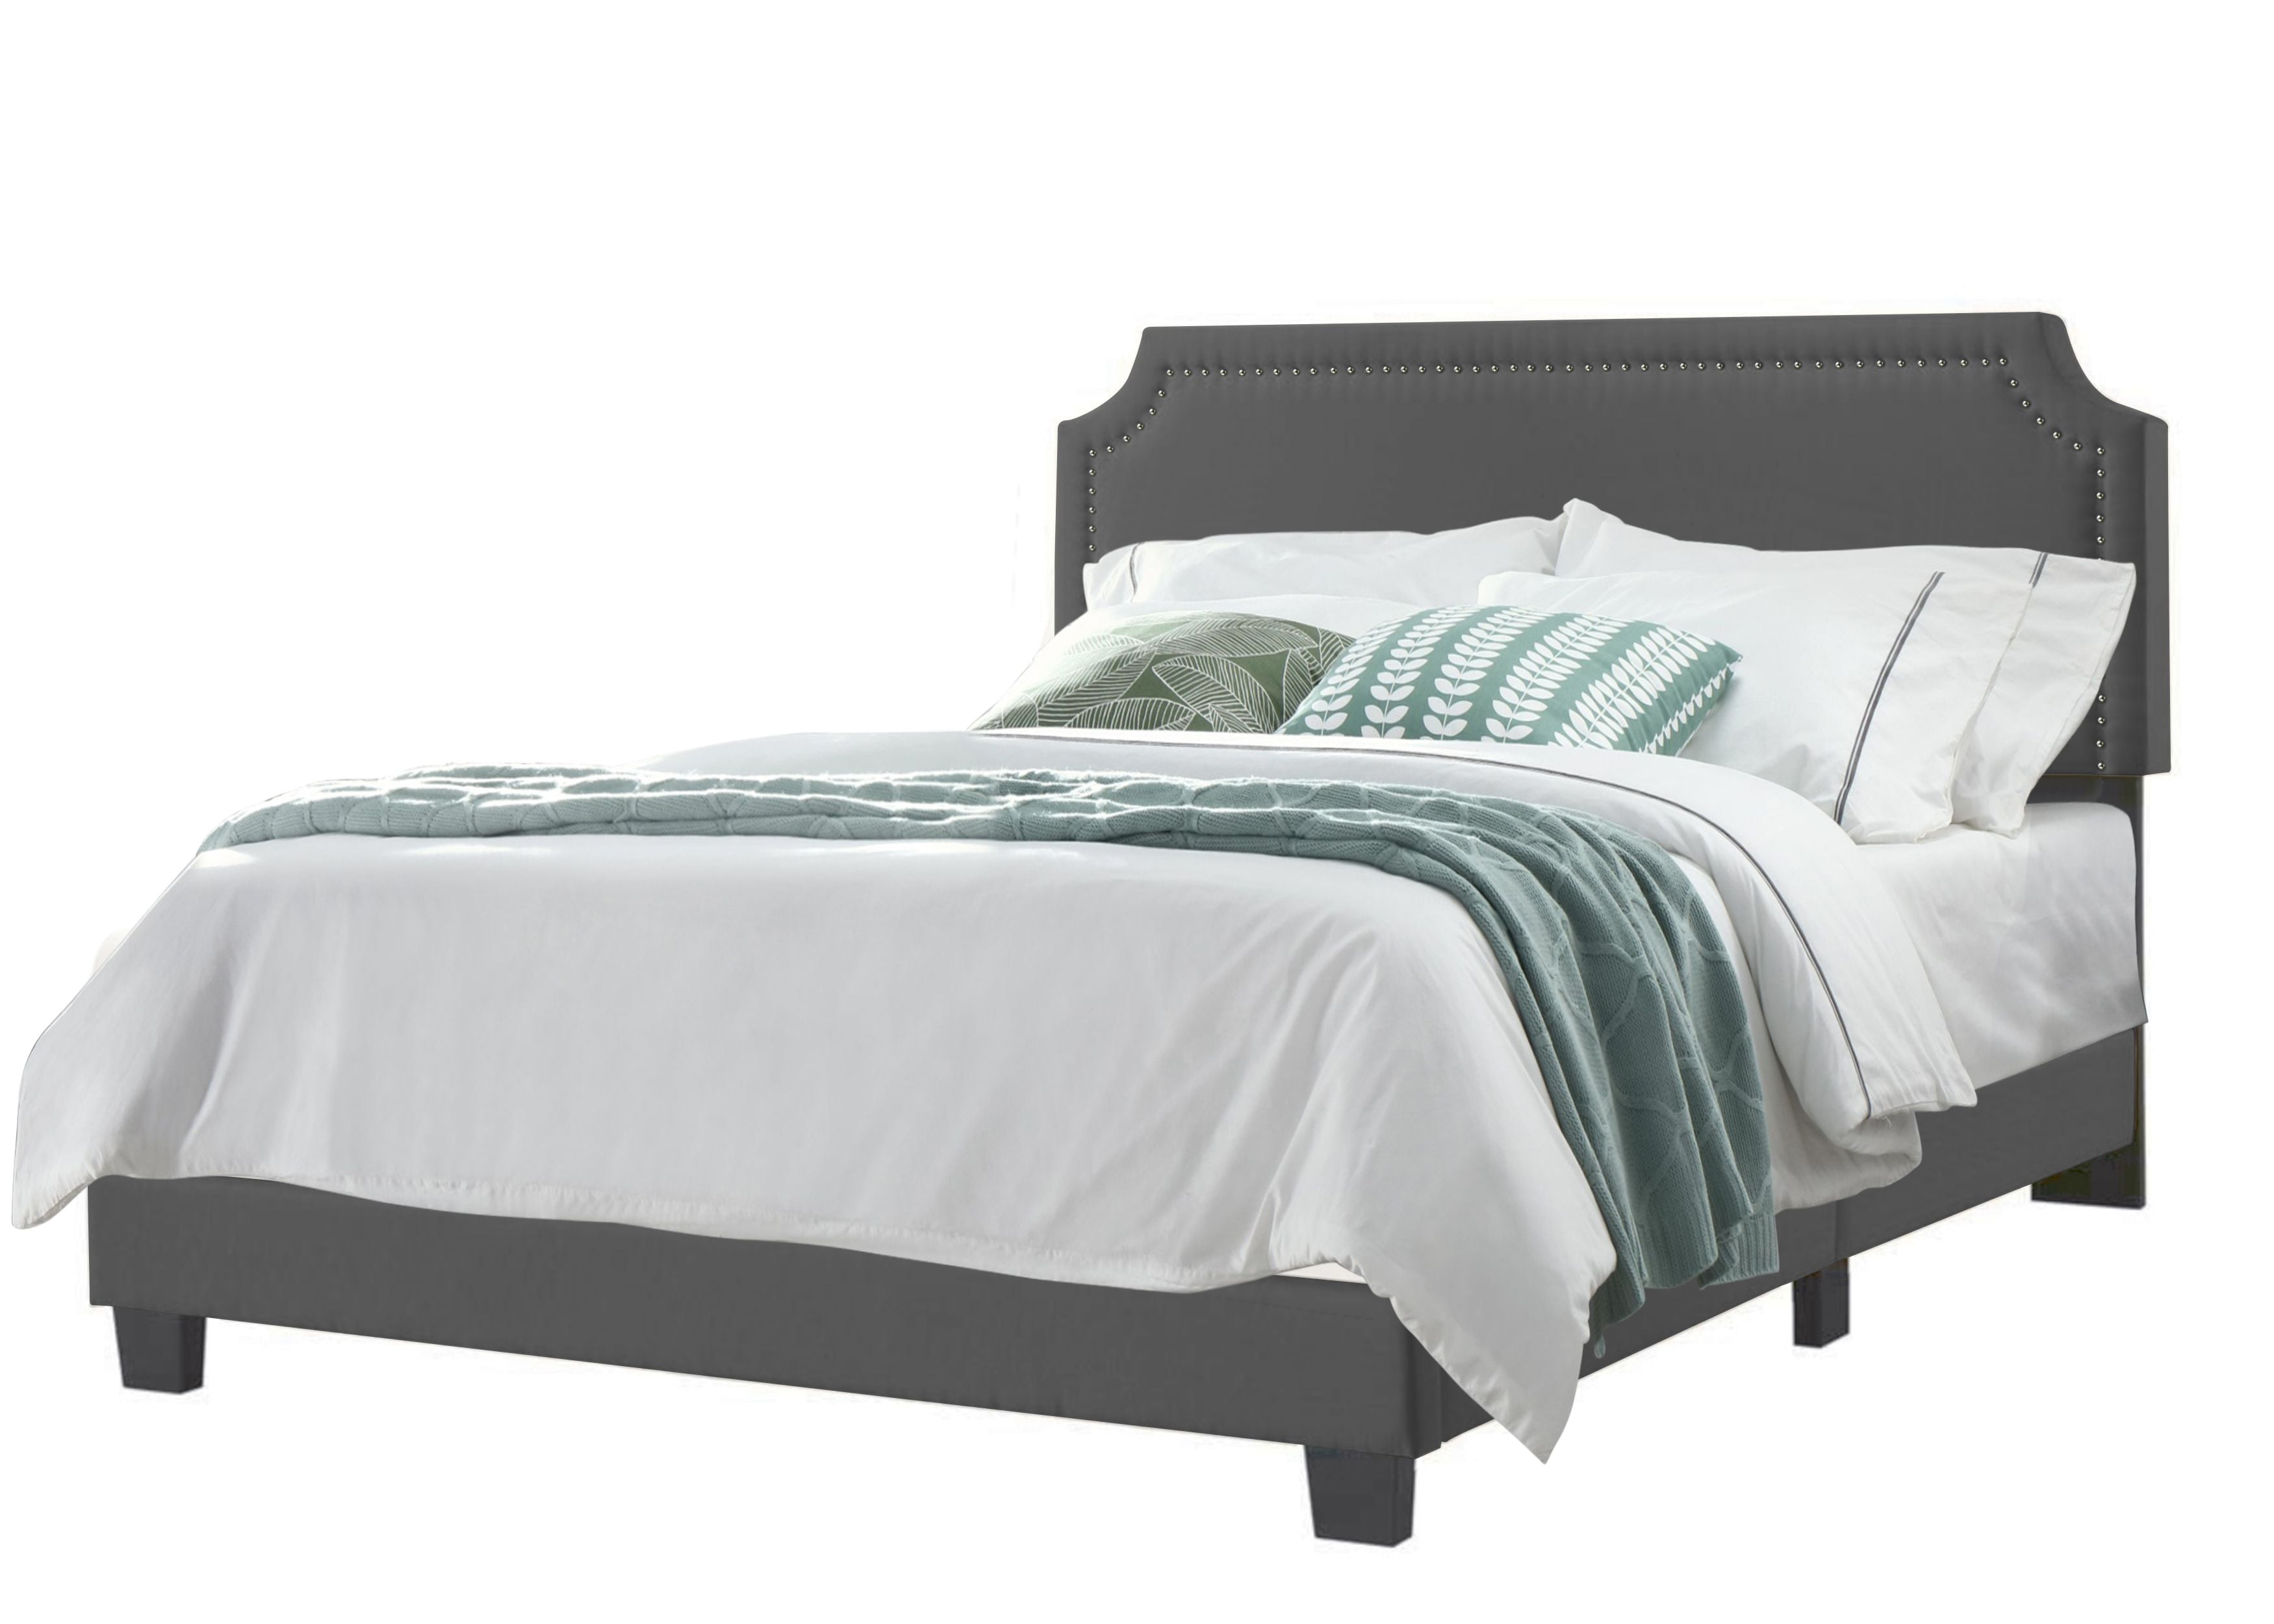 Regal Upholstered Bed With Nail Trim, Atlanta King Size Bed With Led Headboard